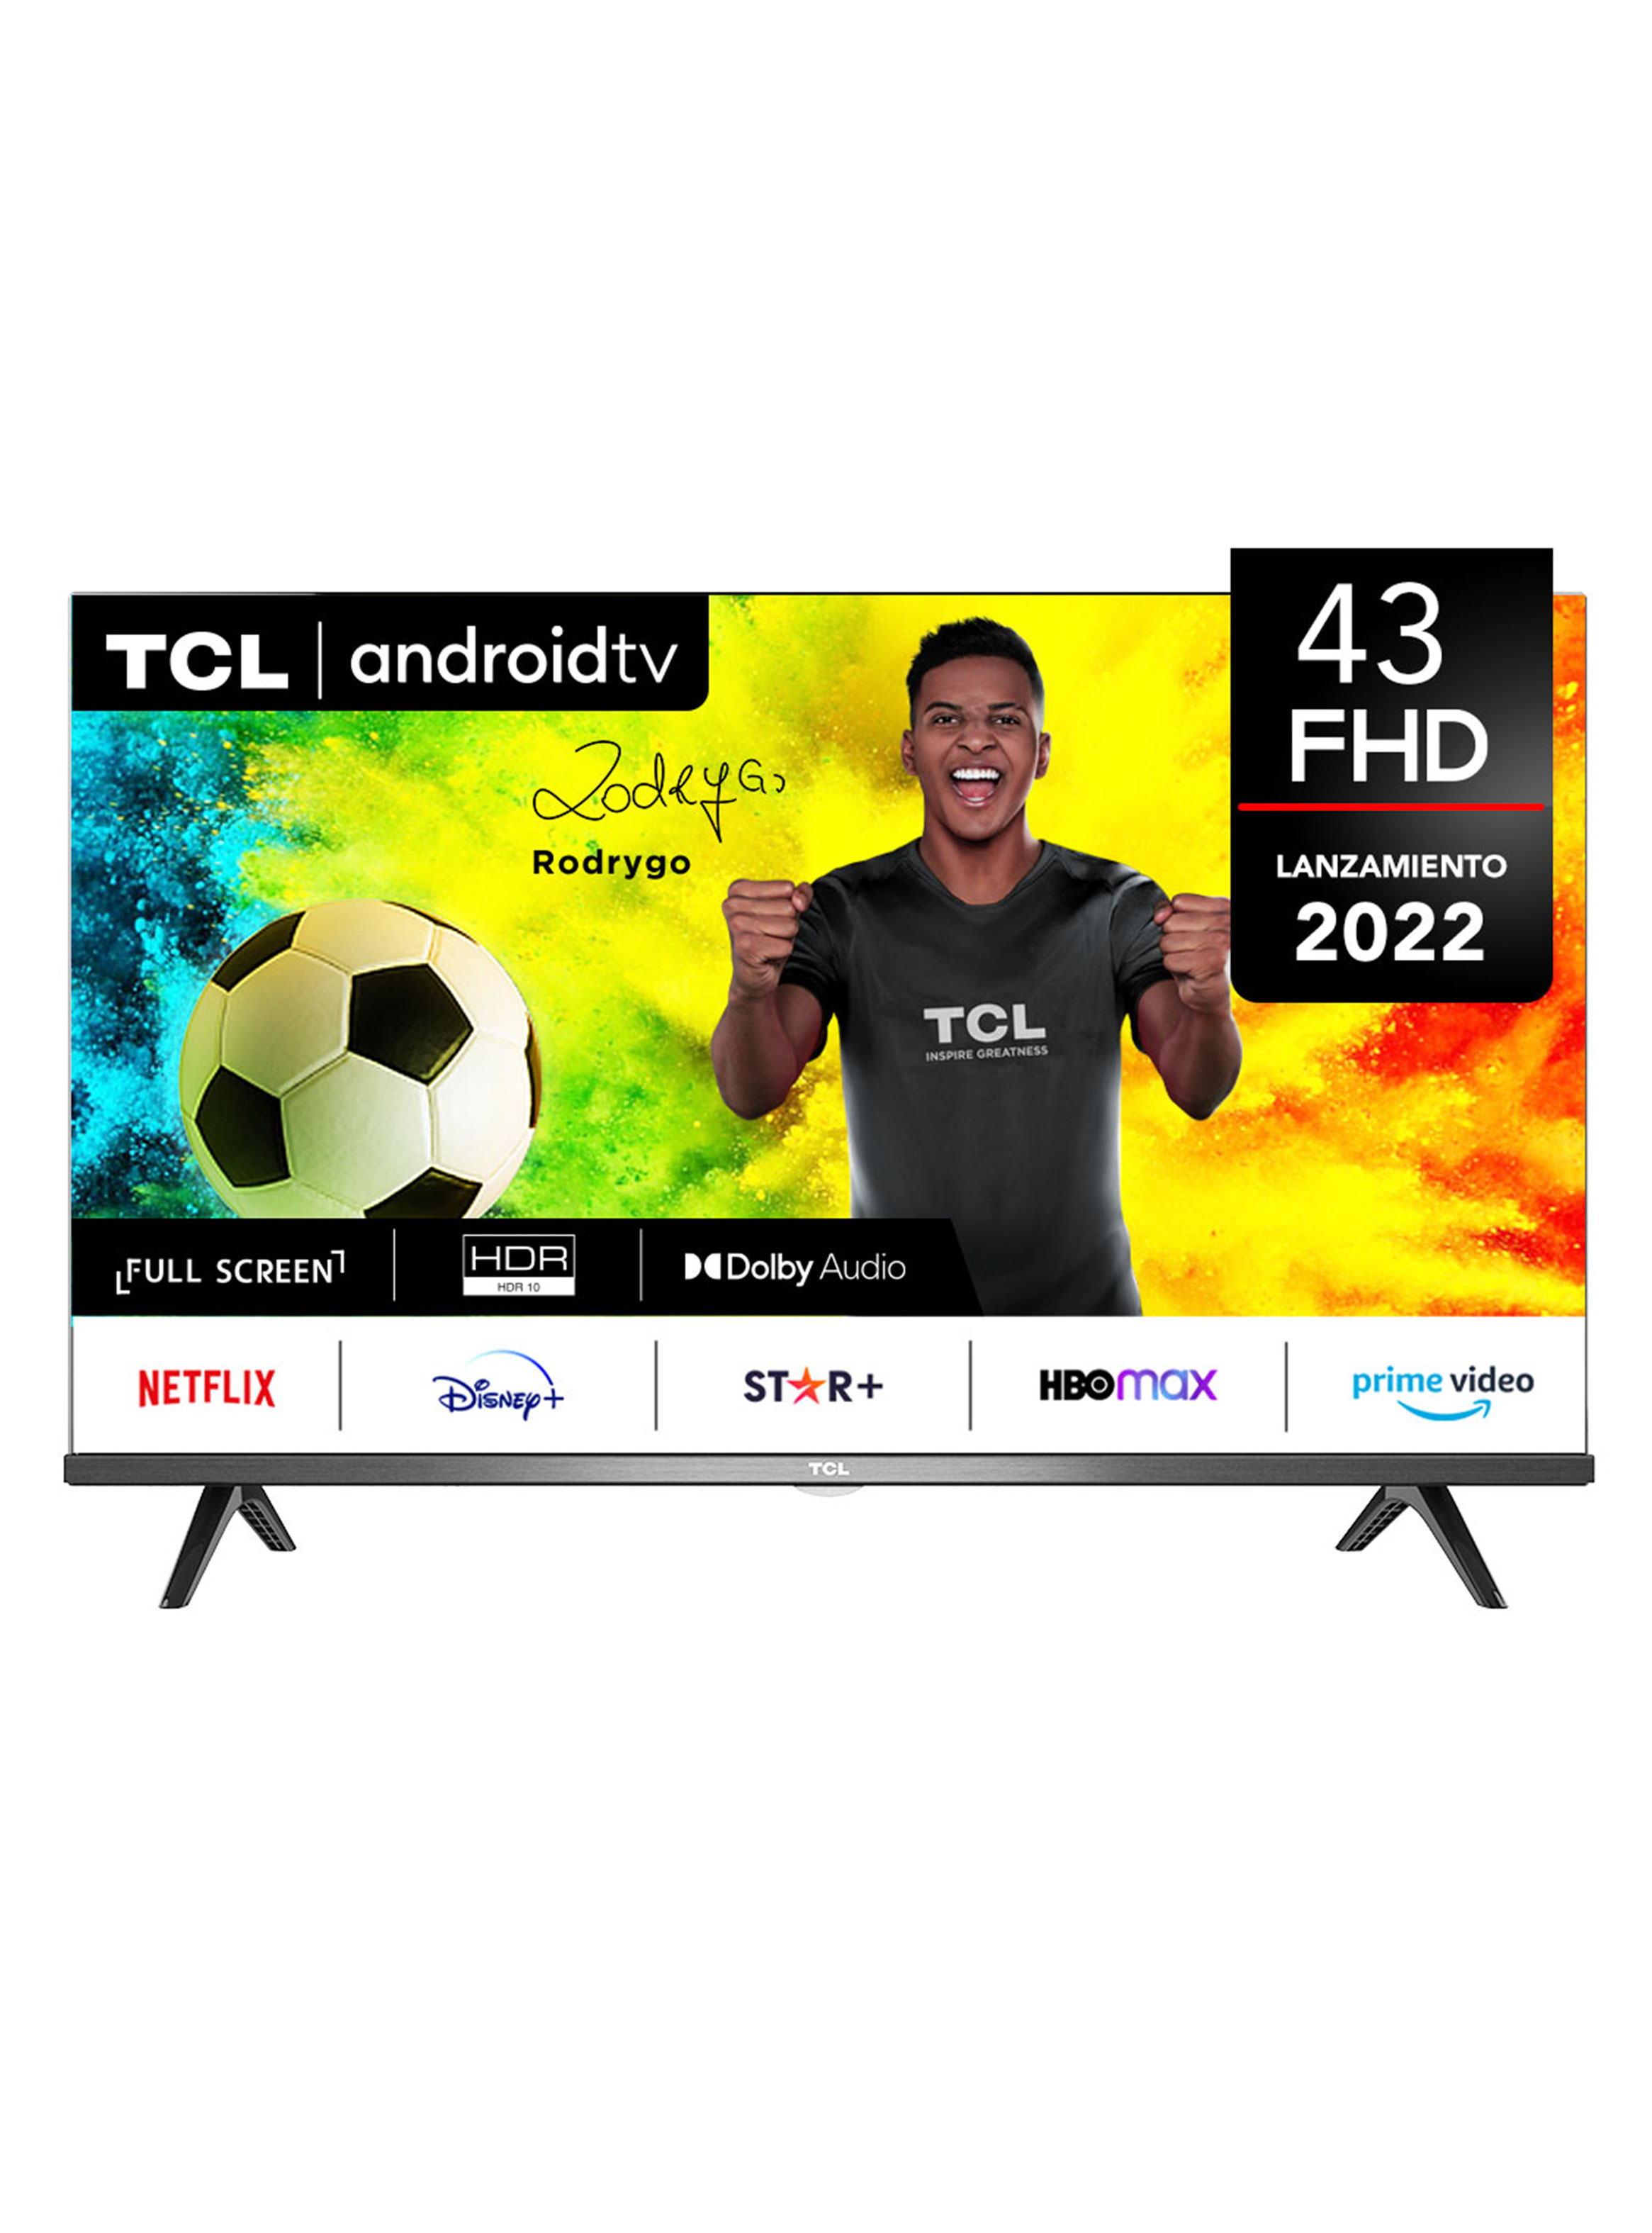 LED Smart TV 43" FHD 43S65A Anroid TV Full Screen